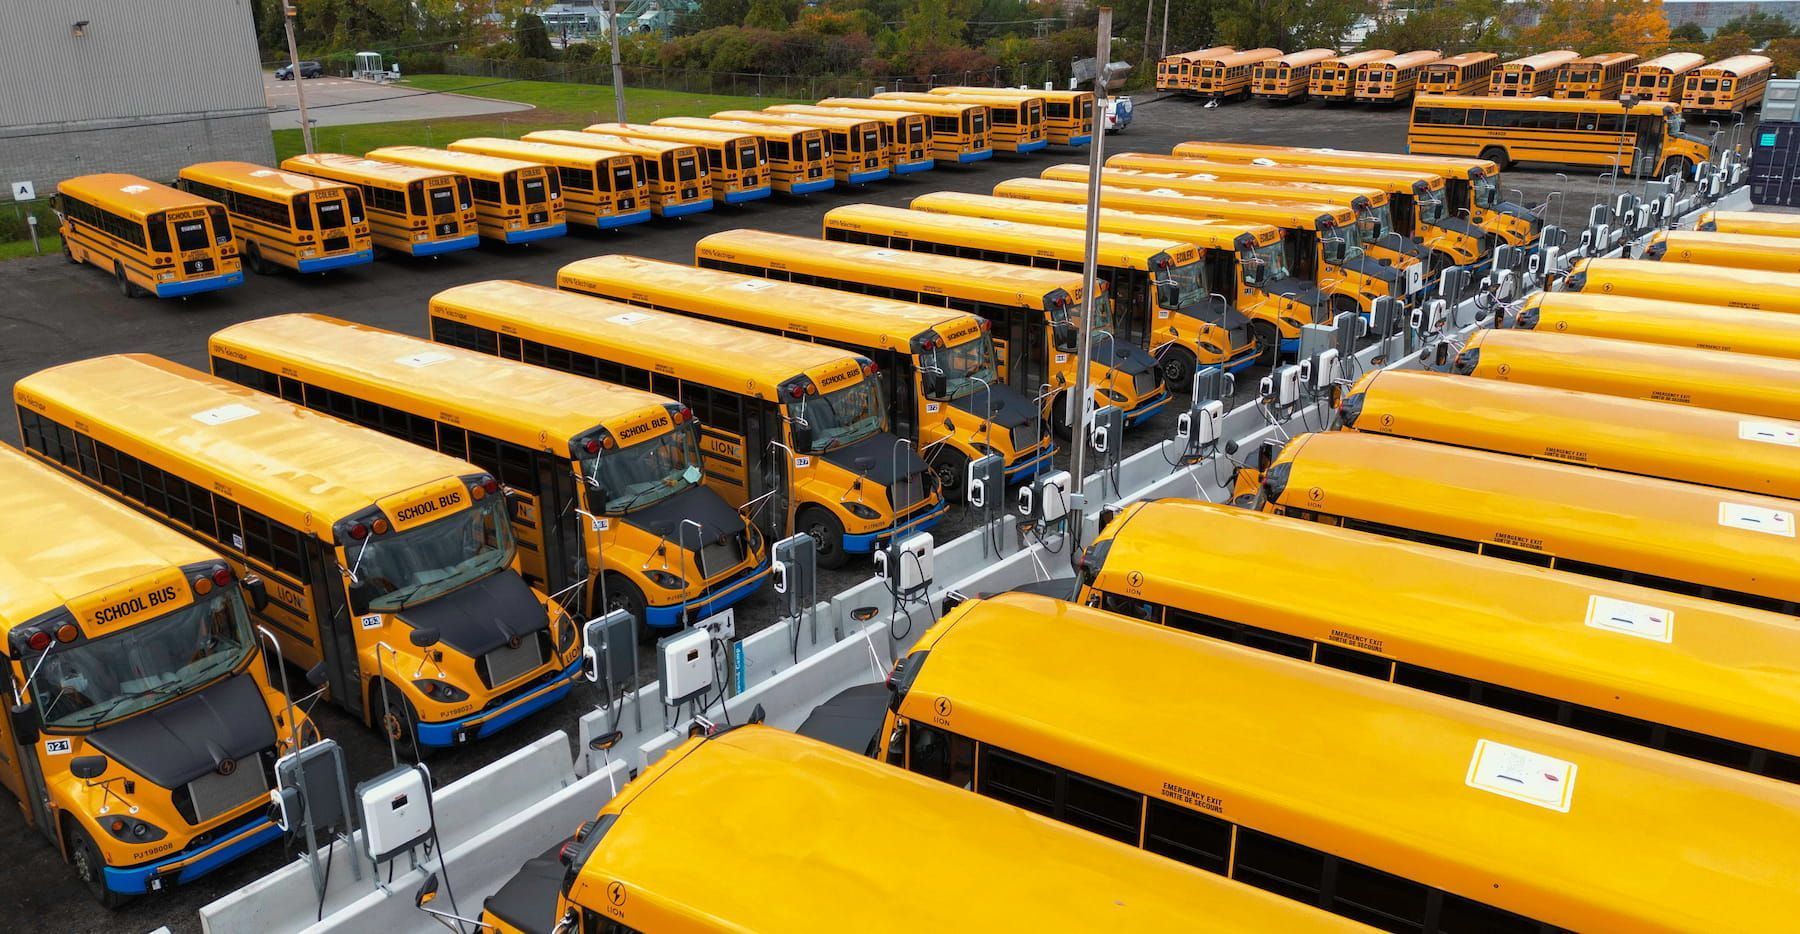 Rows of electric yellow school buses charging.